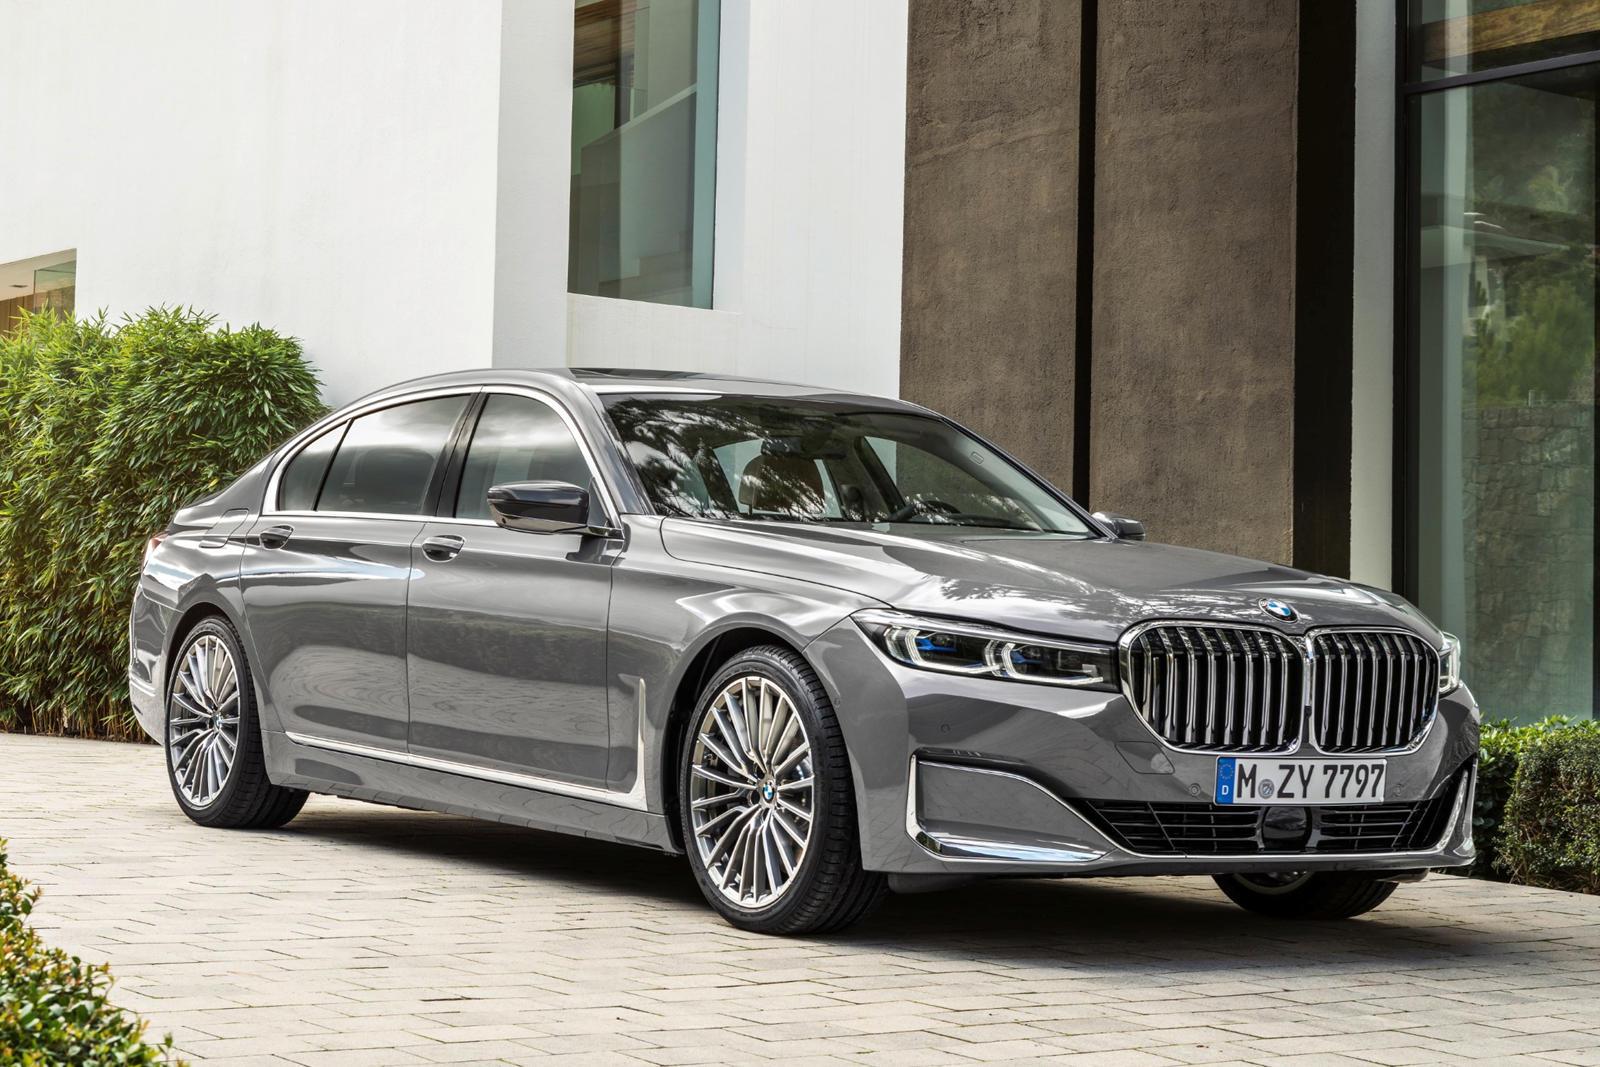 2022 BMW 7 Series: Review, Trims, Specs, Price, New Interior Features